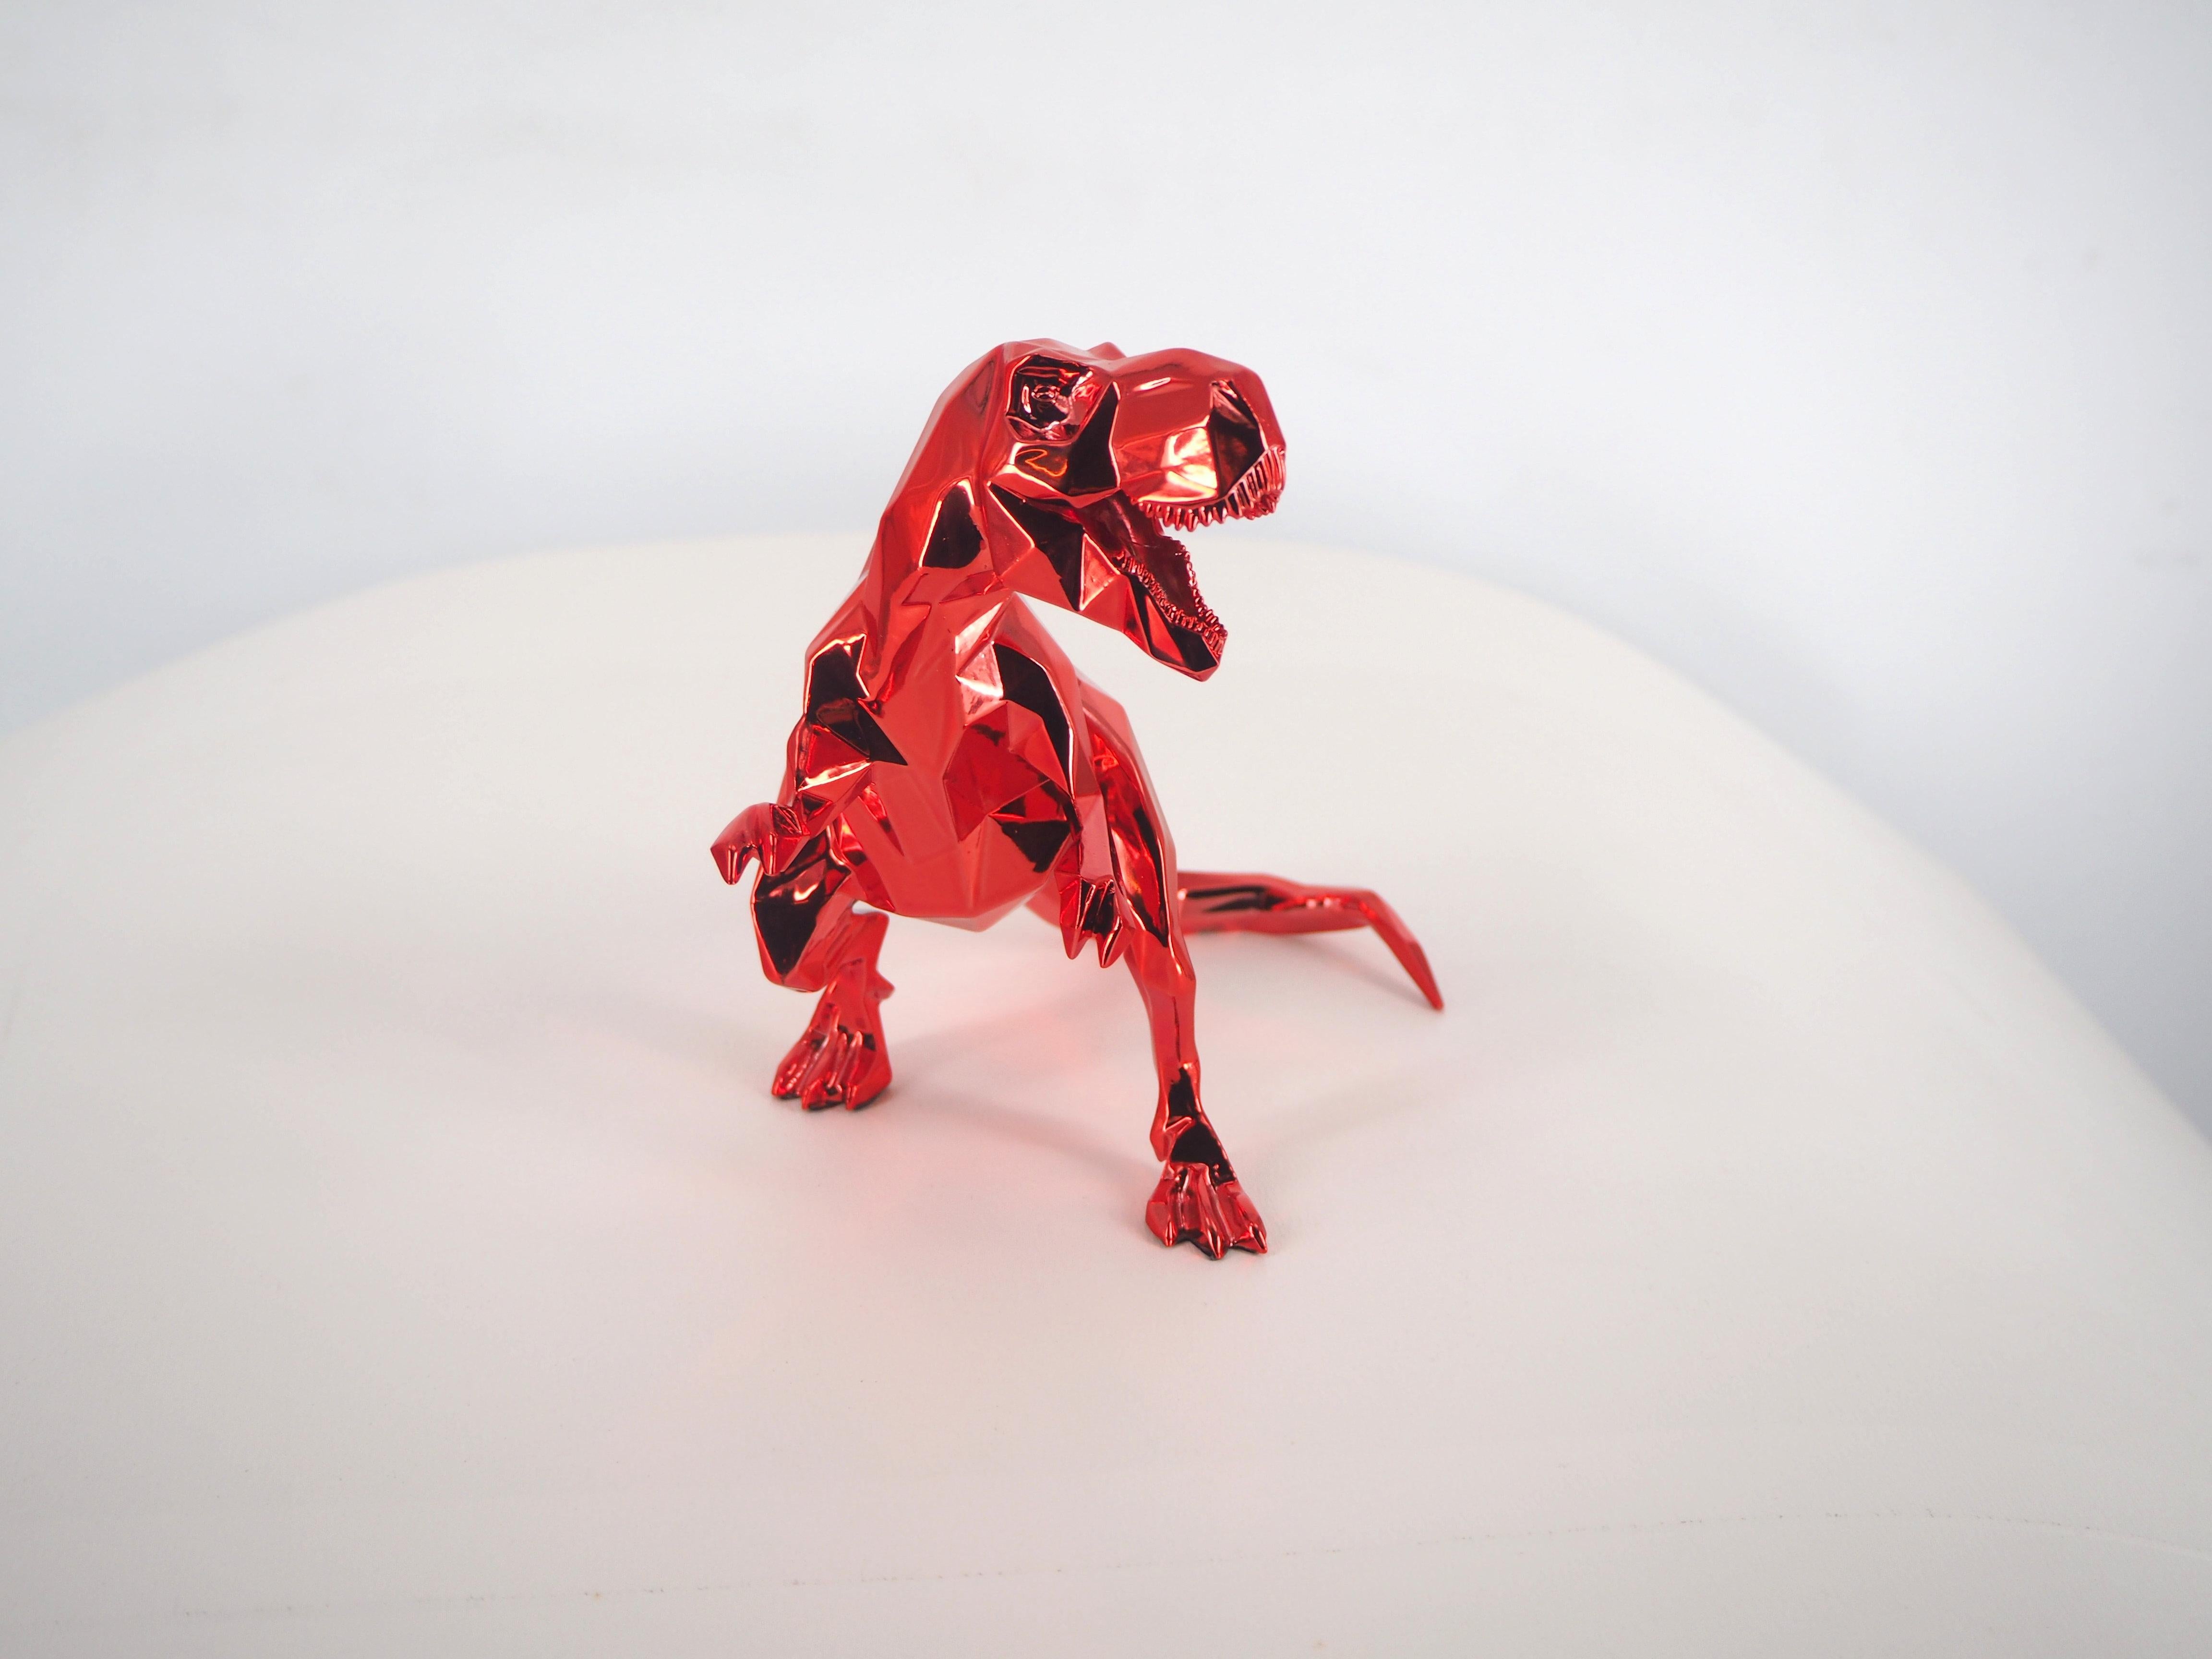 Richard ORLINSKI
T-Rex Spirit (Red Edition)

Sculpture in resin
Metallic Red
About 14.5 x 10 cm (c. 5.5 x 4 in)
Presented in original box with certificate

Excellent condition